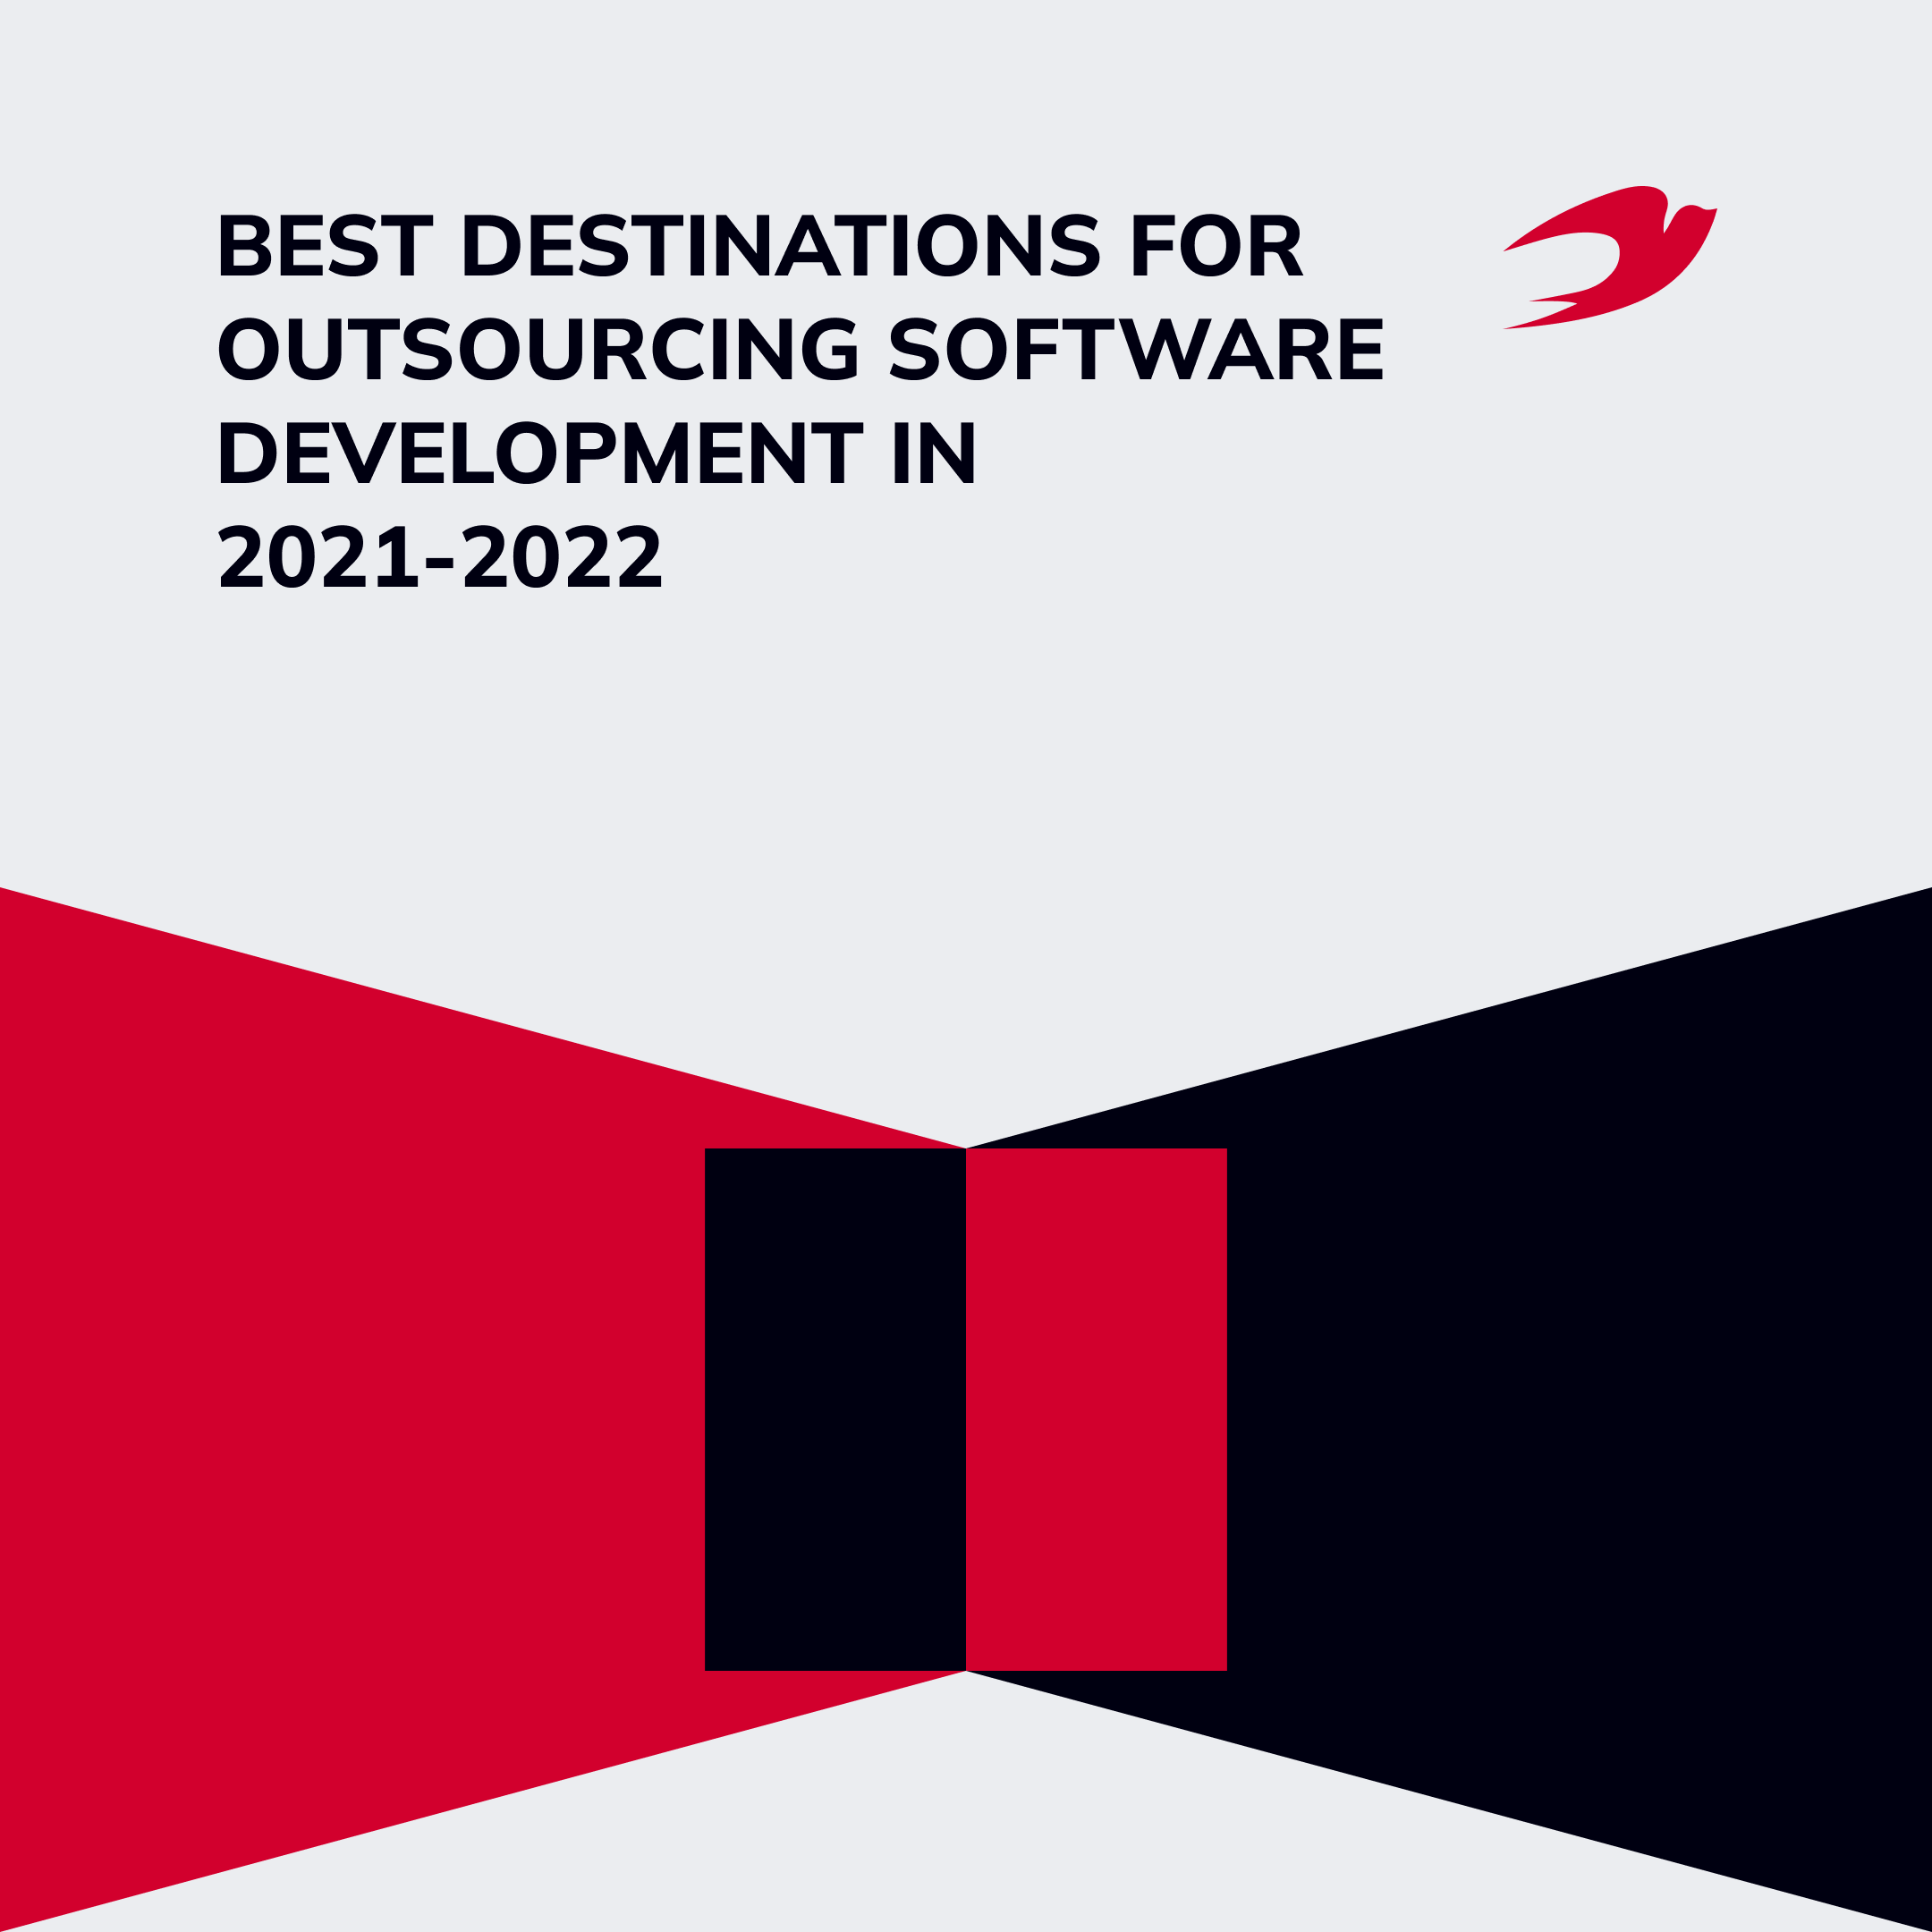 Best Destinations for Outsourcing Software Development in 2021-2022